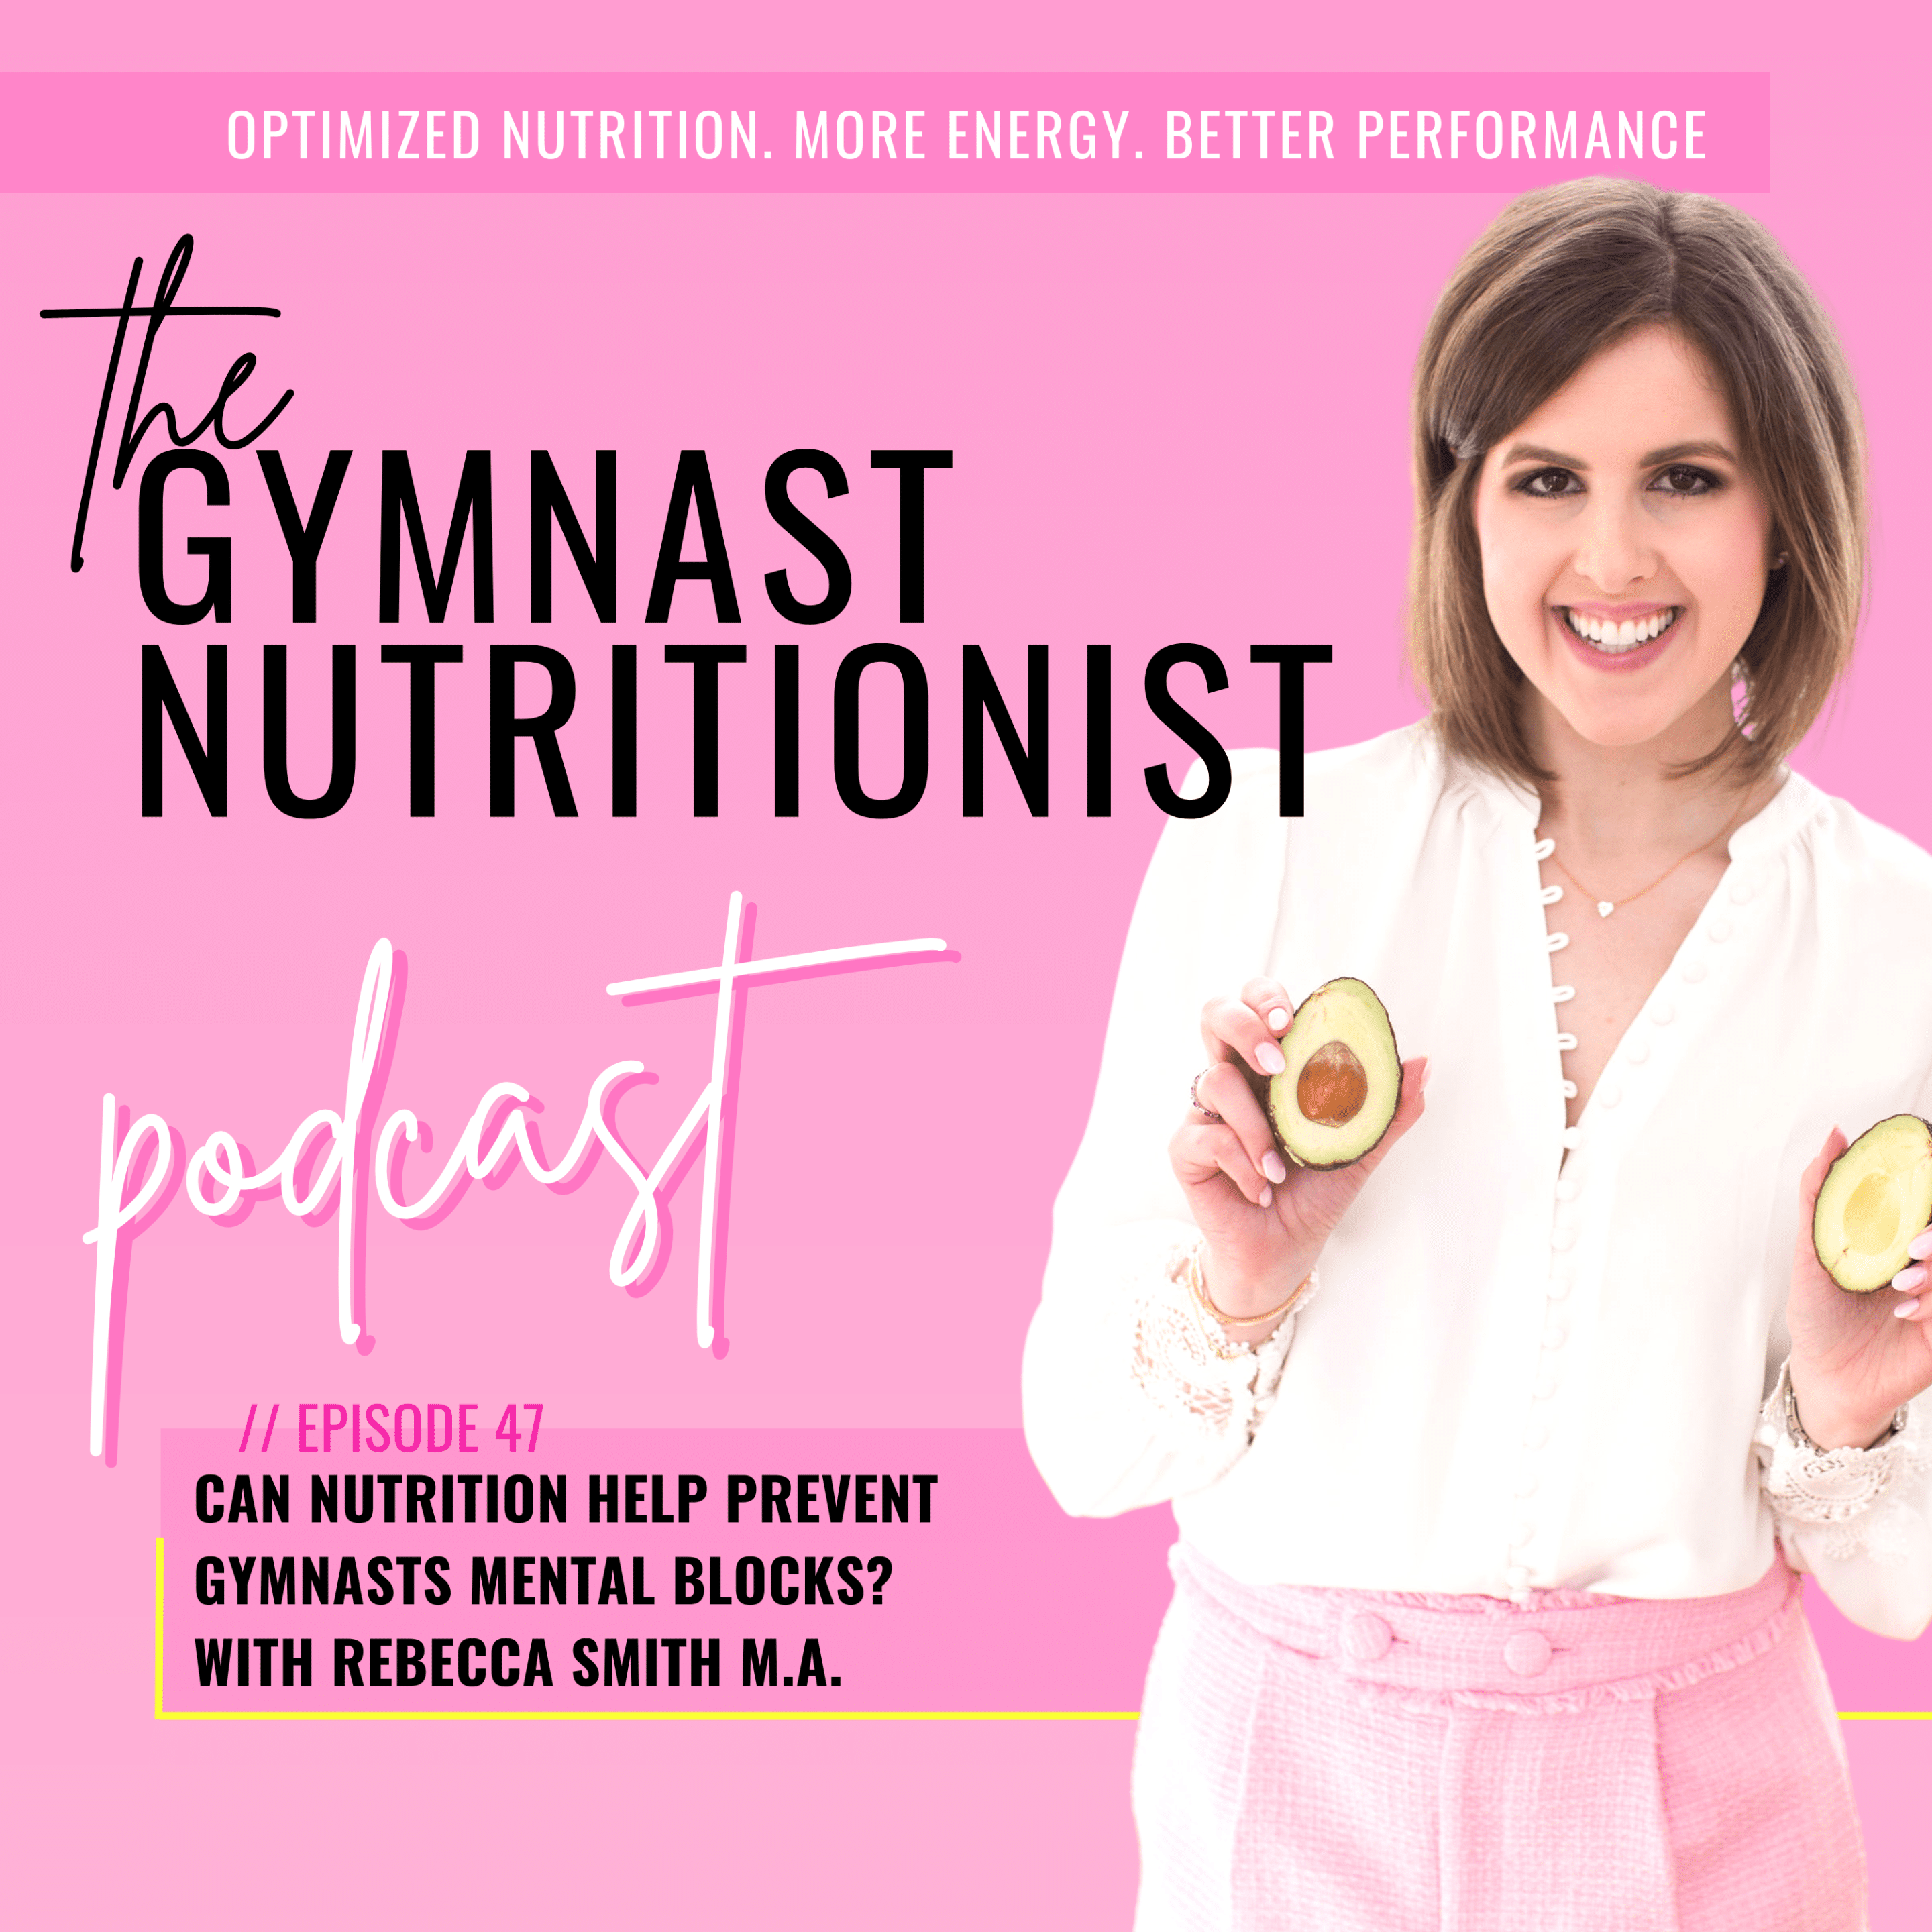 Episode 47: Can Nutrition Help Prevent Gymnasts Mental Blocks? with Rebecca Smith M.A.